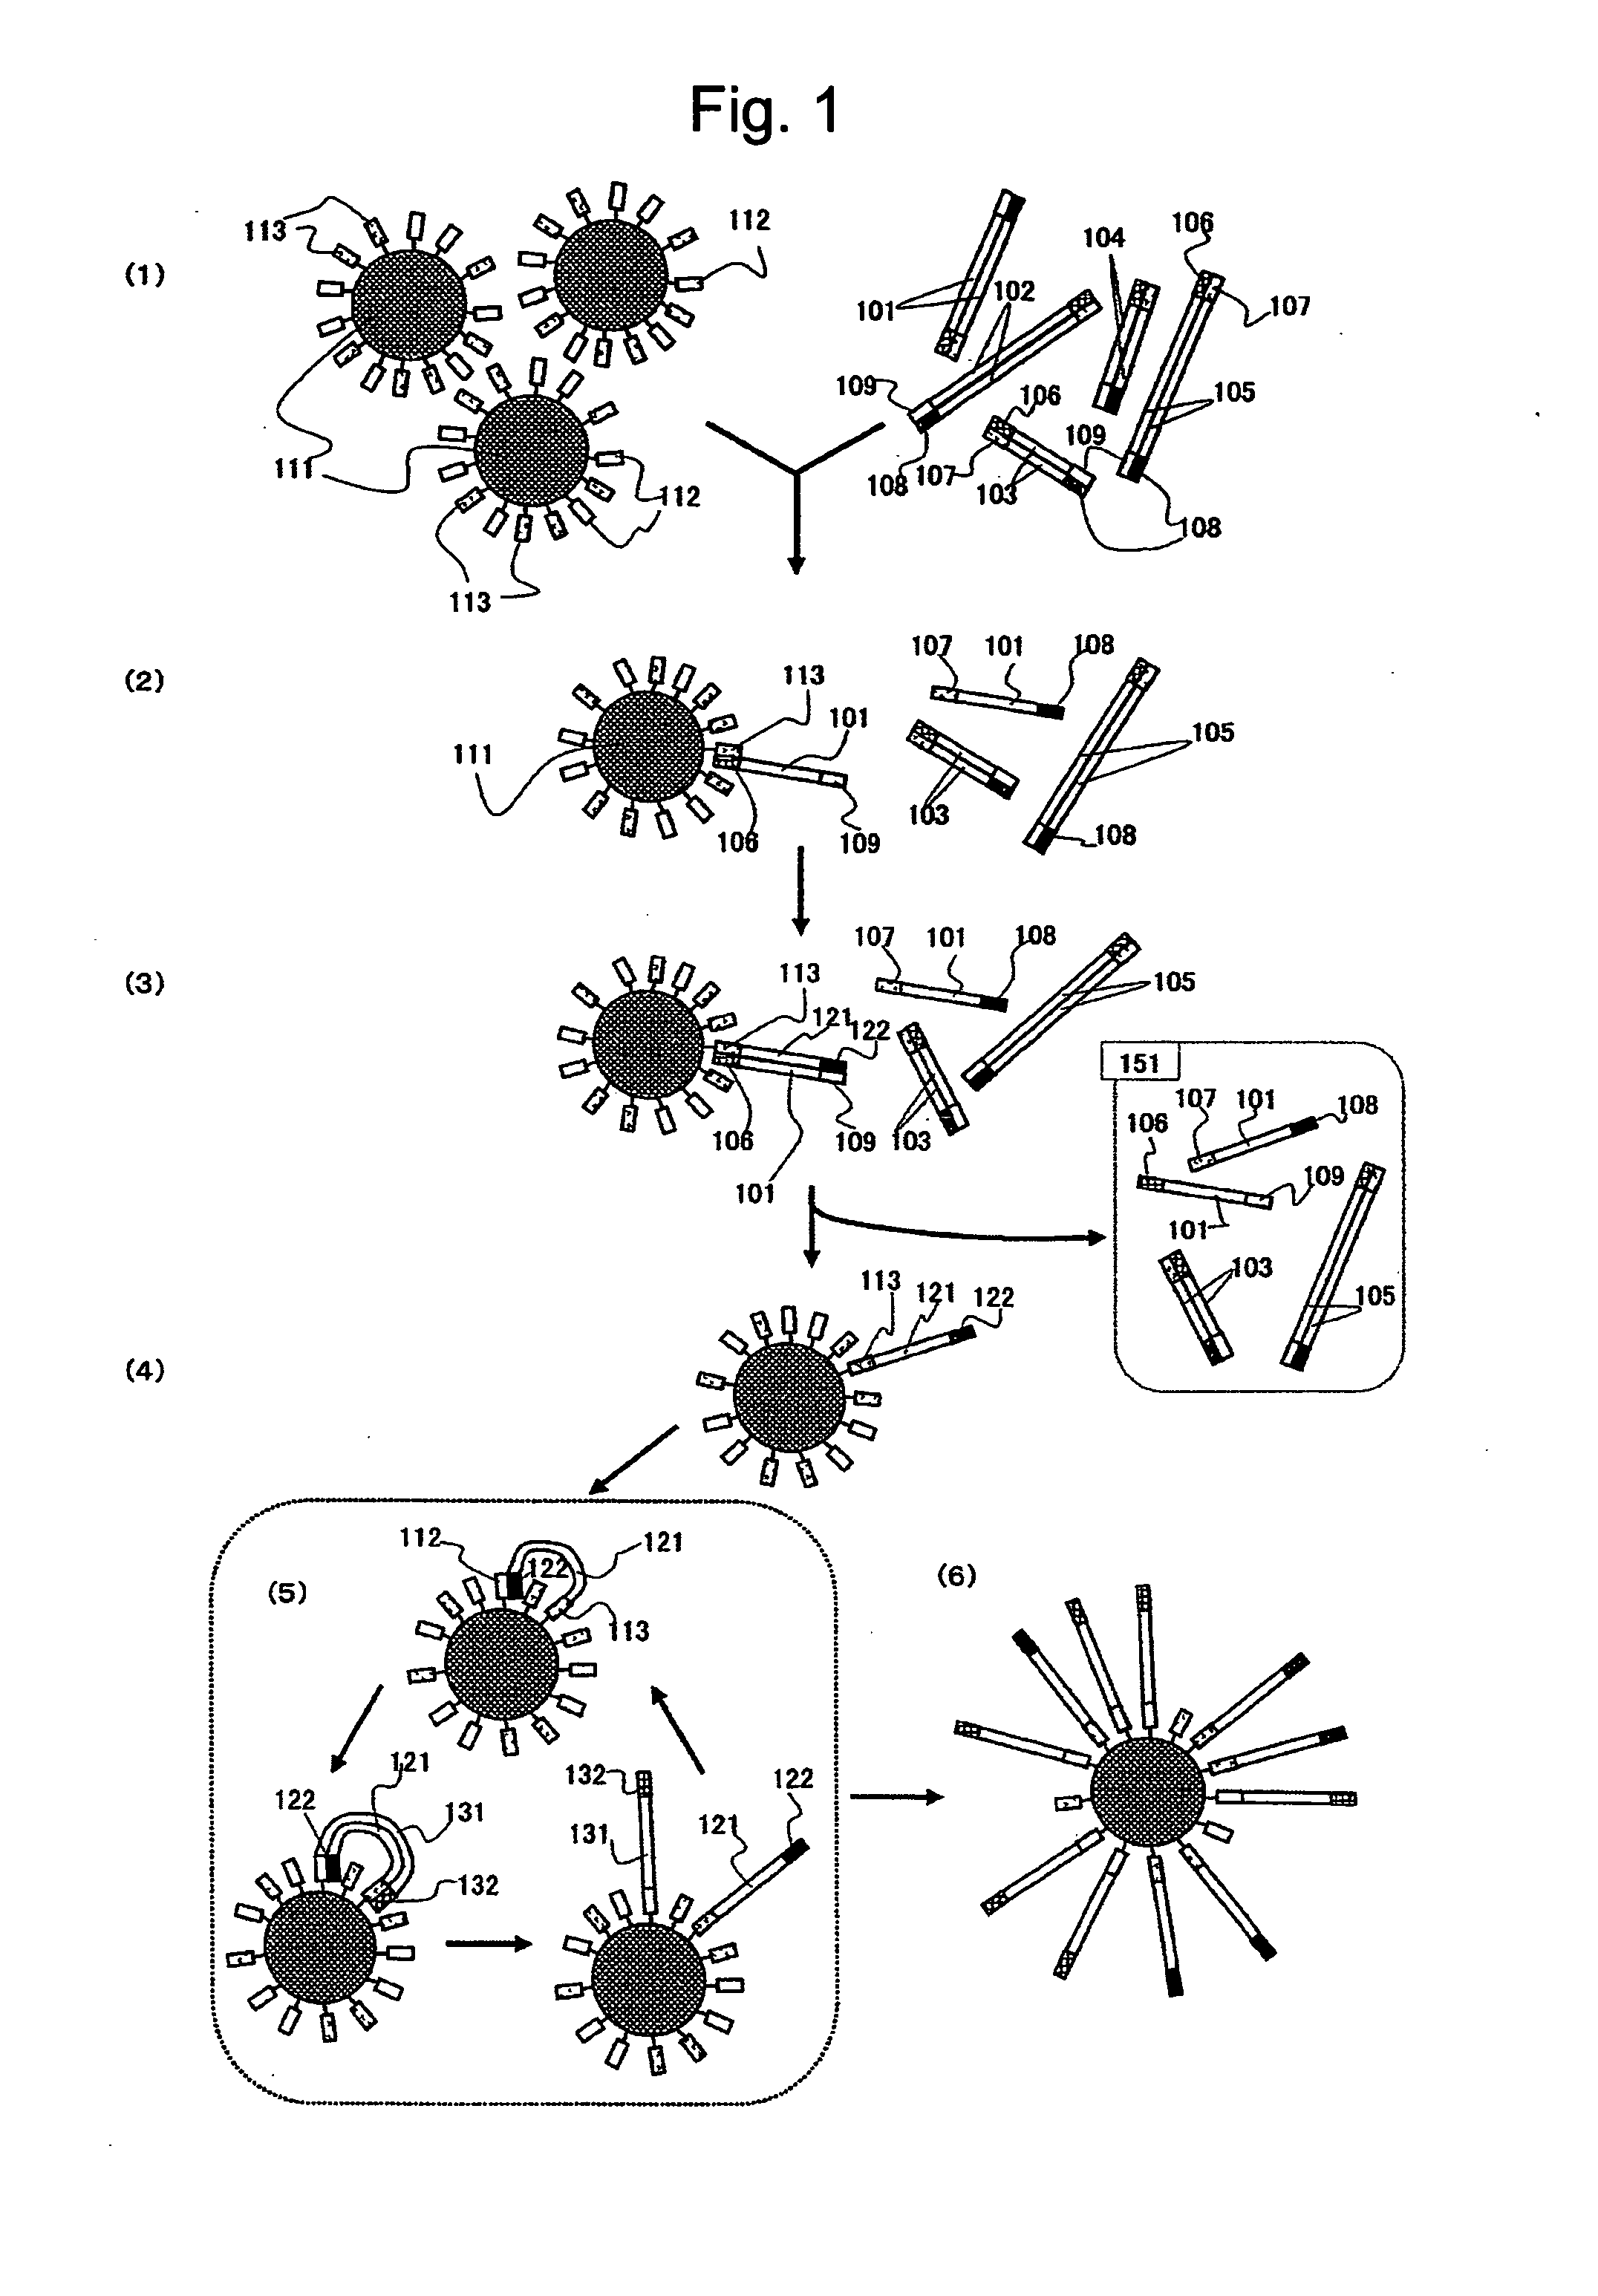 Large-scale parallel nucleic acid analysis method